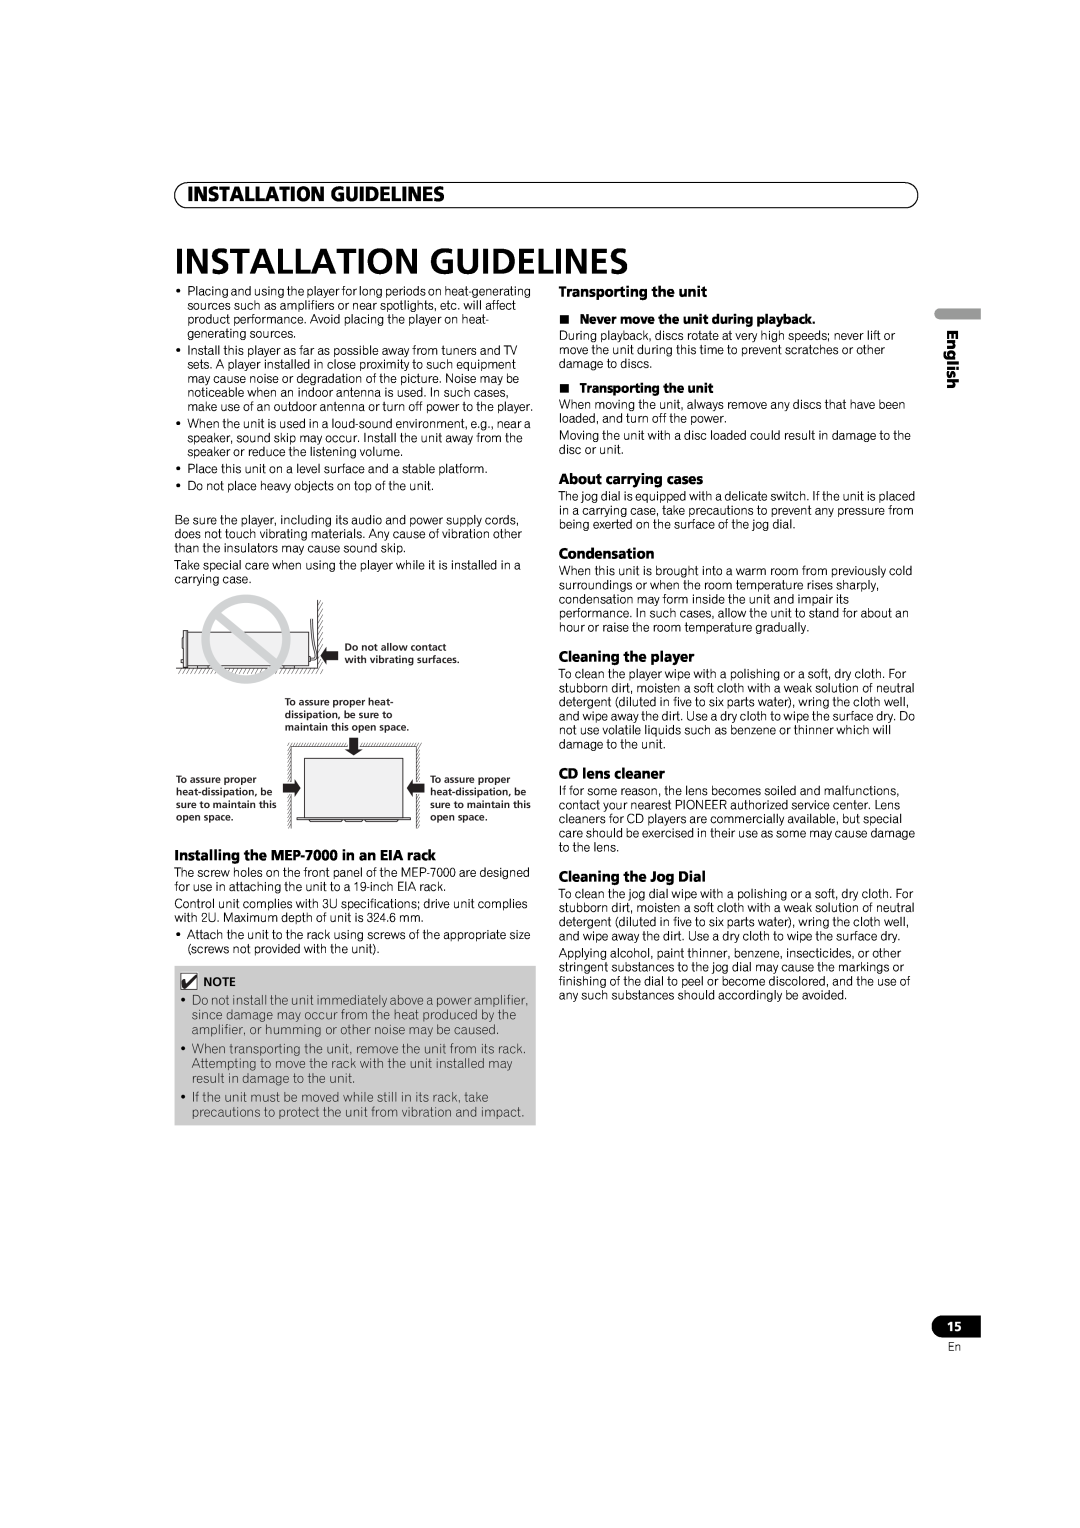 Pioneer MEP-7000 Installation Guidelines, English, Never move the unit during playback, Transporting the unit 